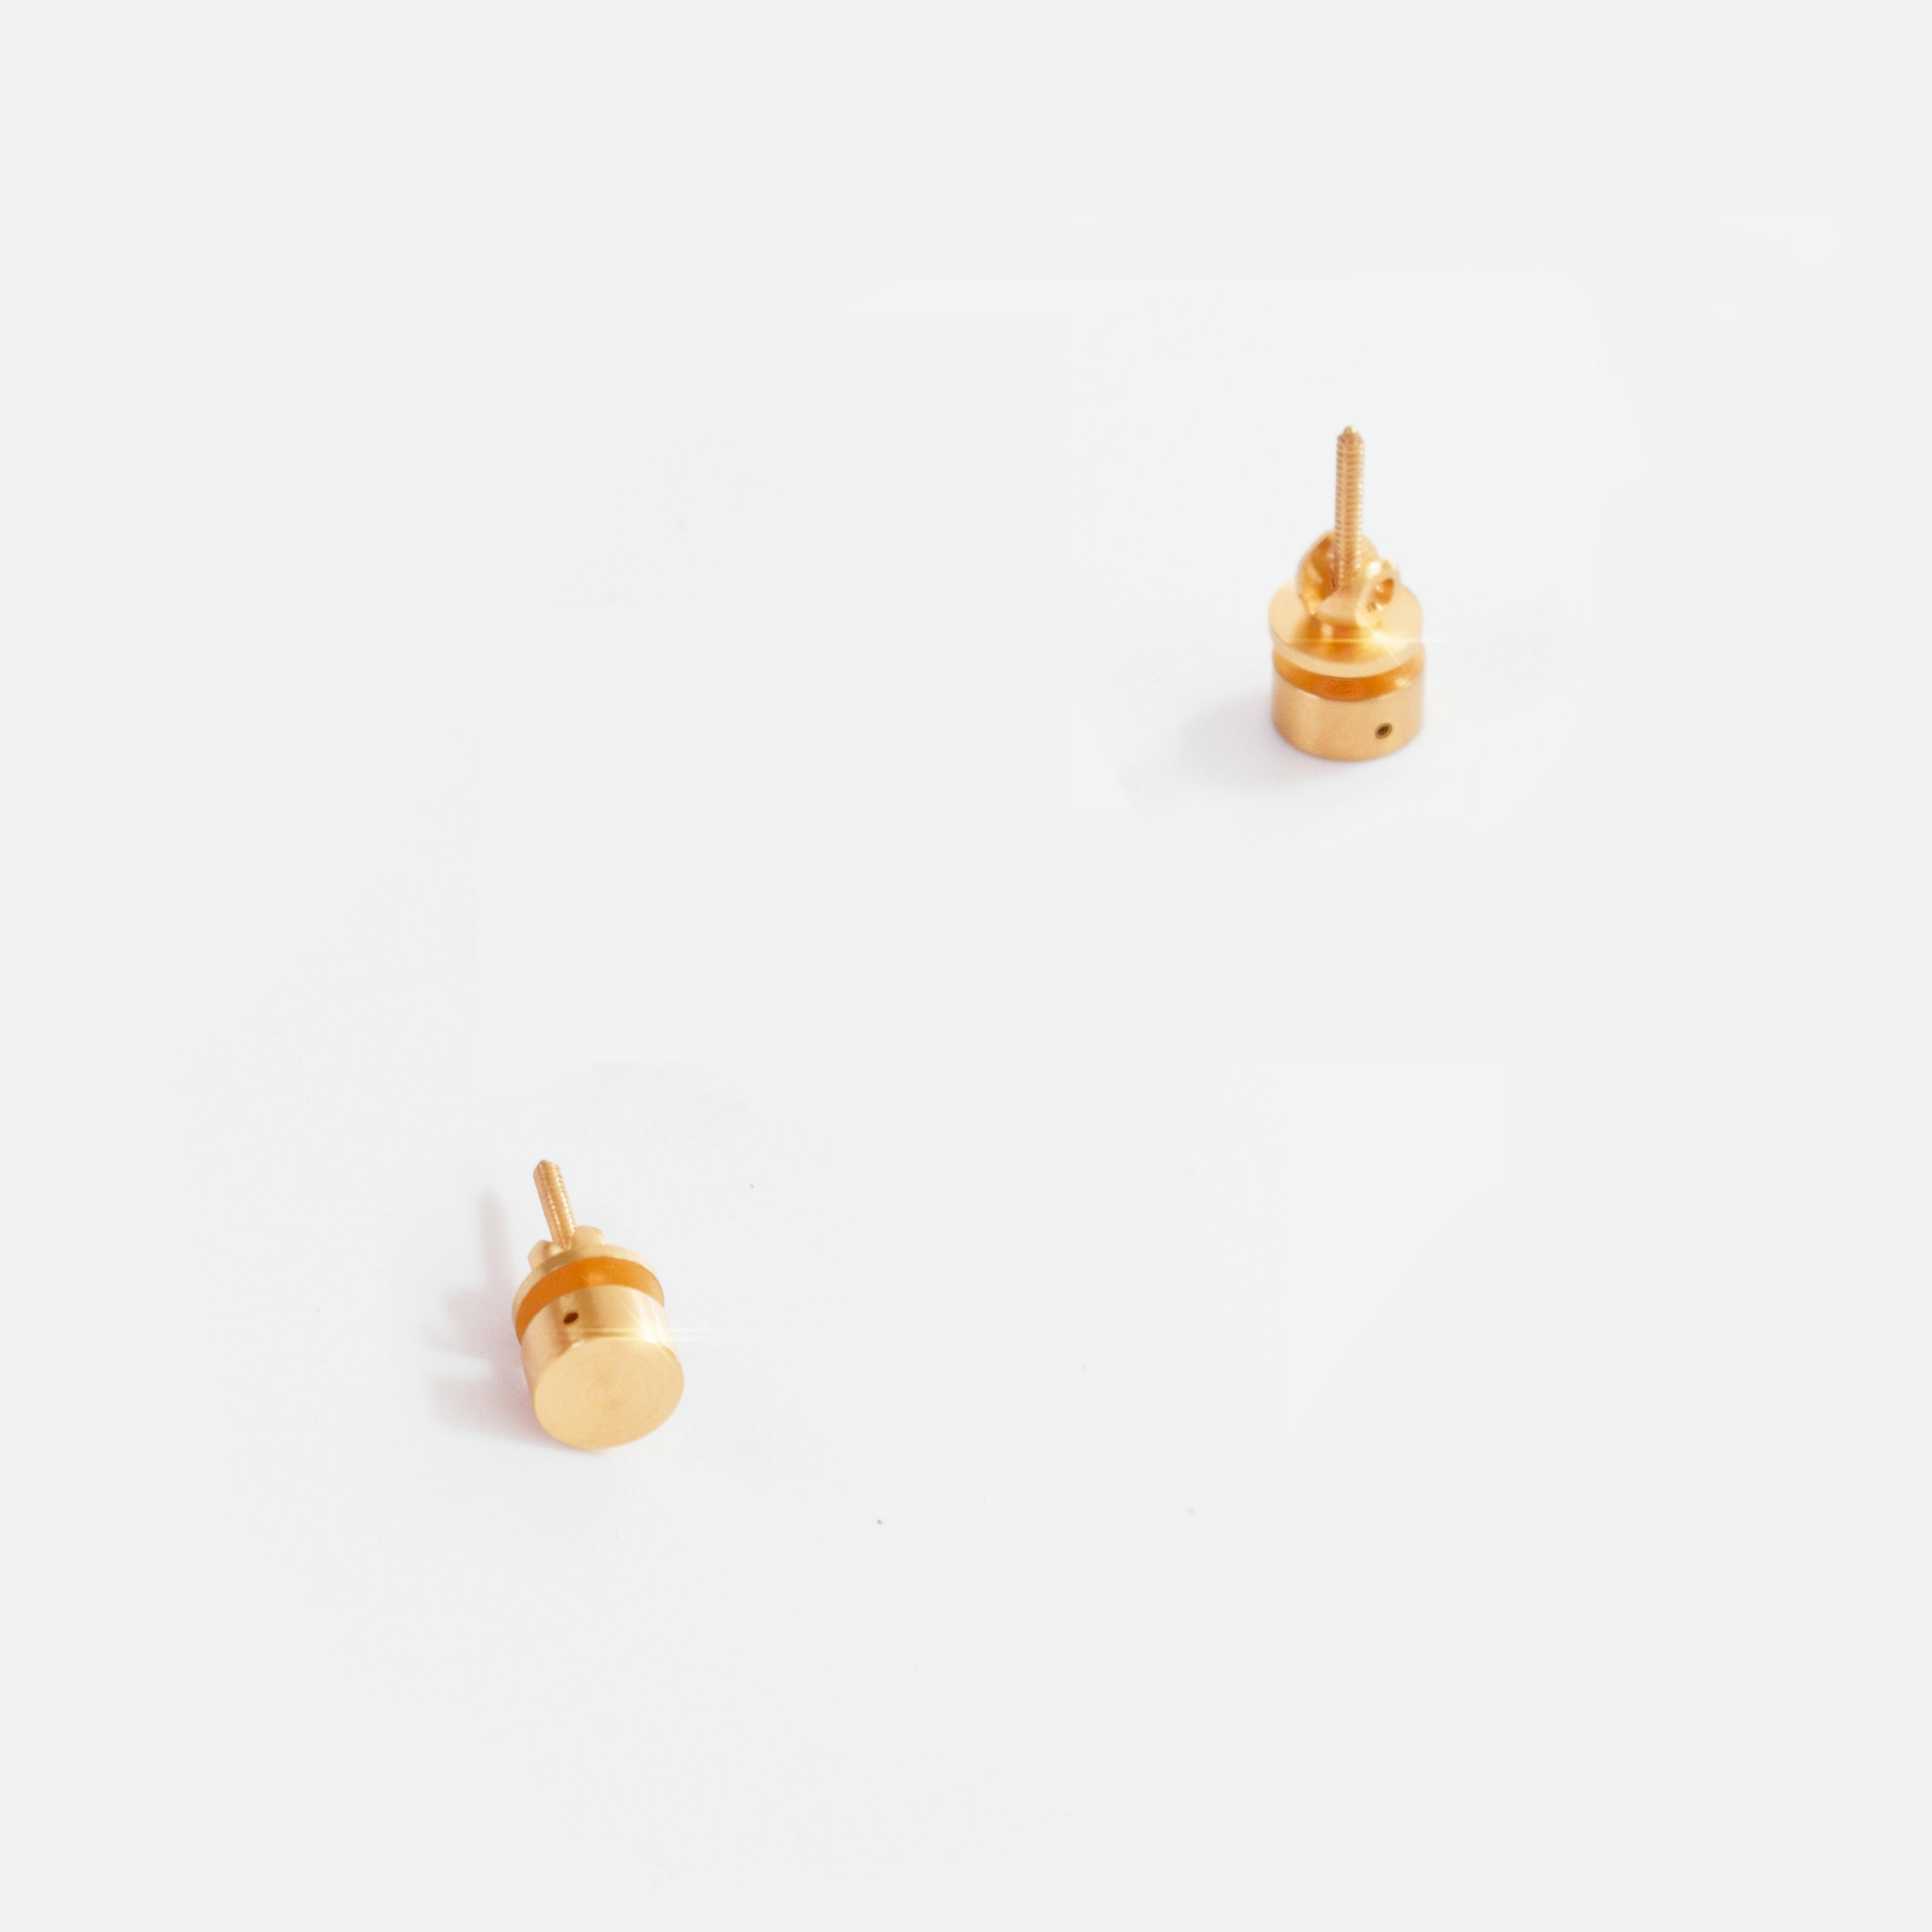 Two Small Peas Ear Studs, a product by NO NA MÉ